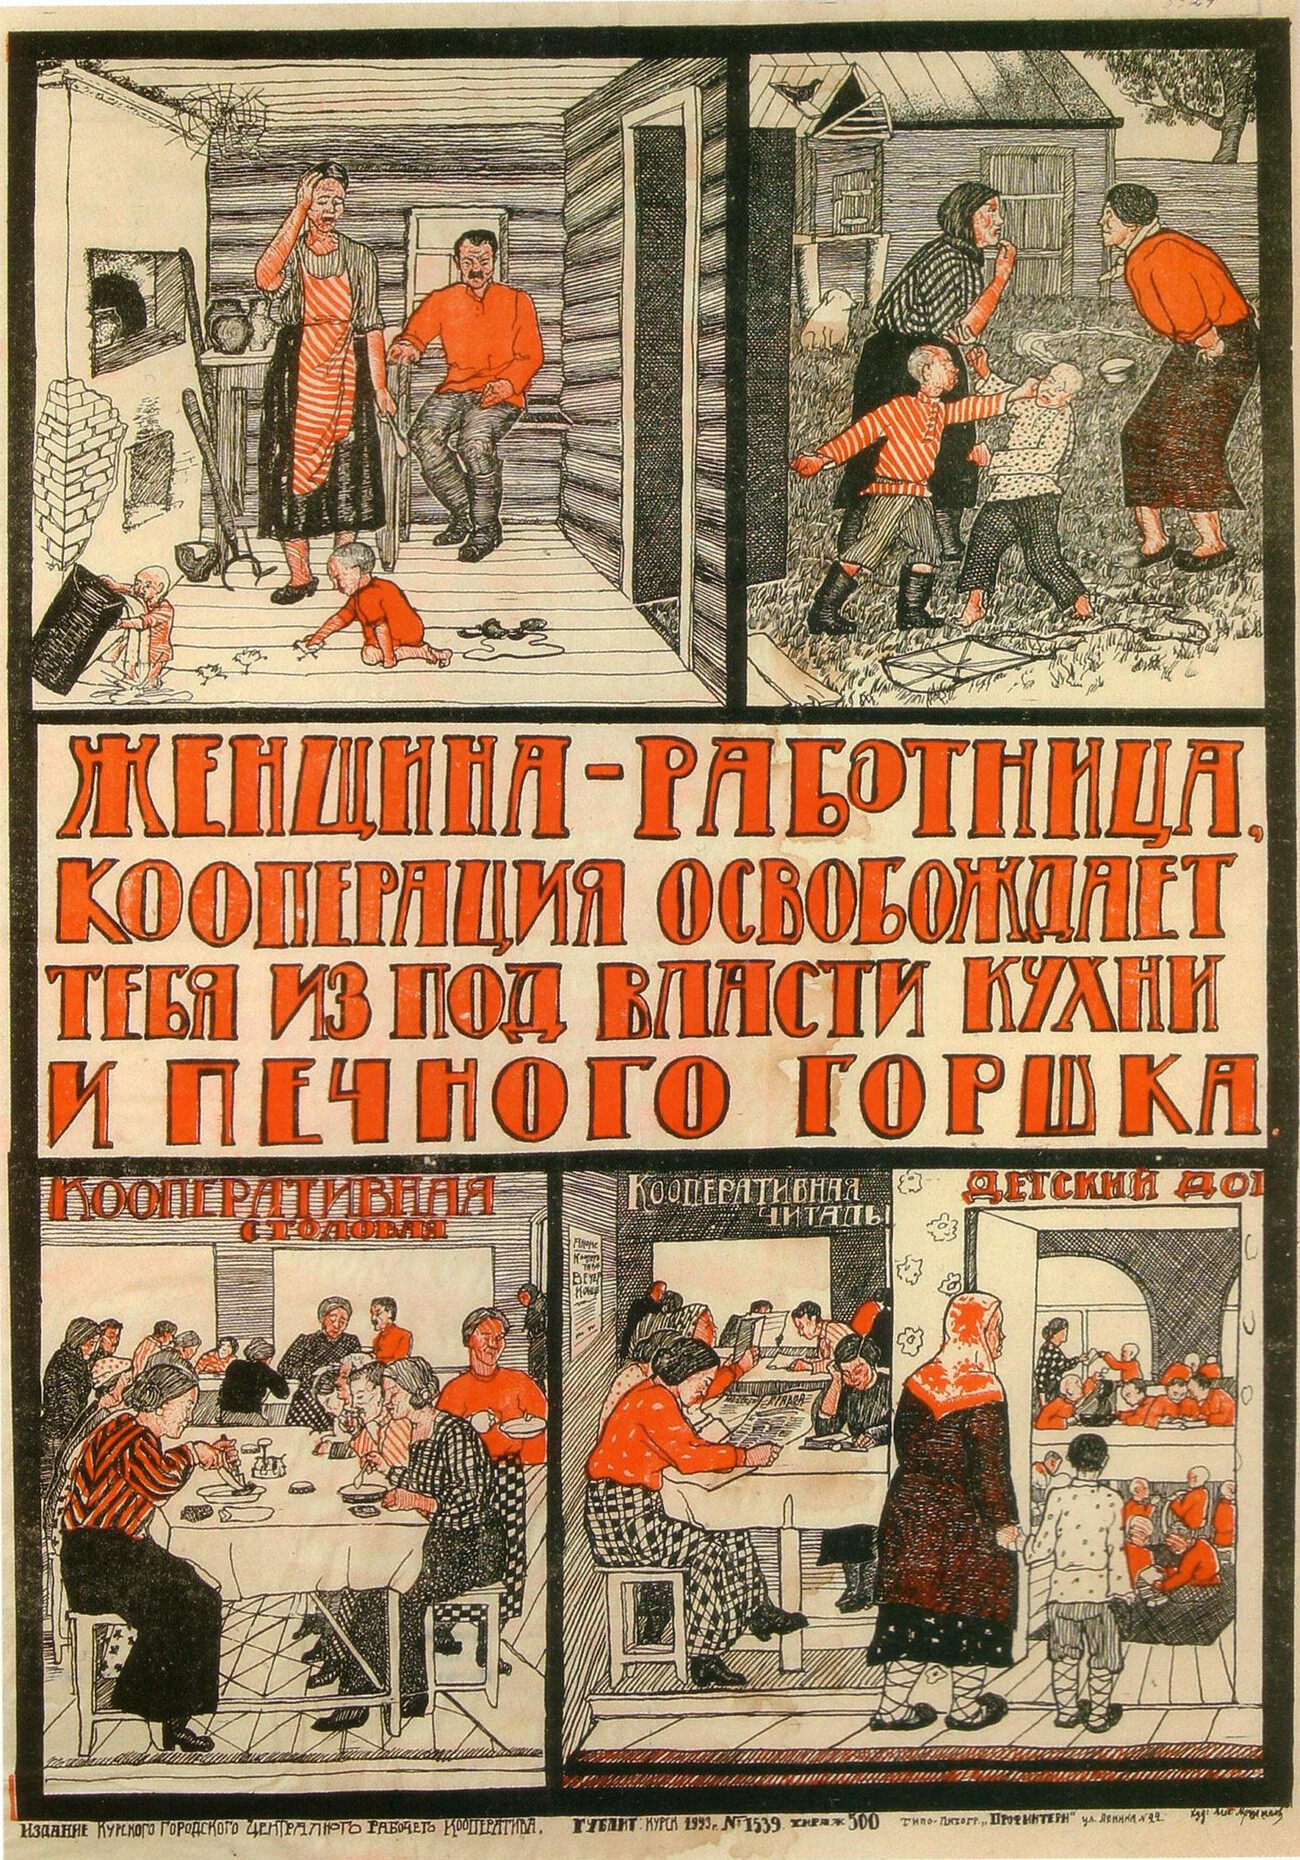 “Working woman - Cooperation frees you from the power of the kitchen and the stove”